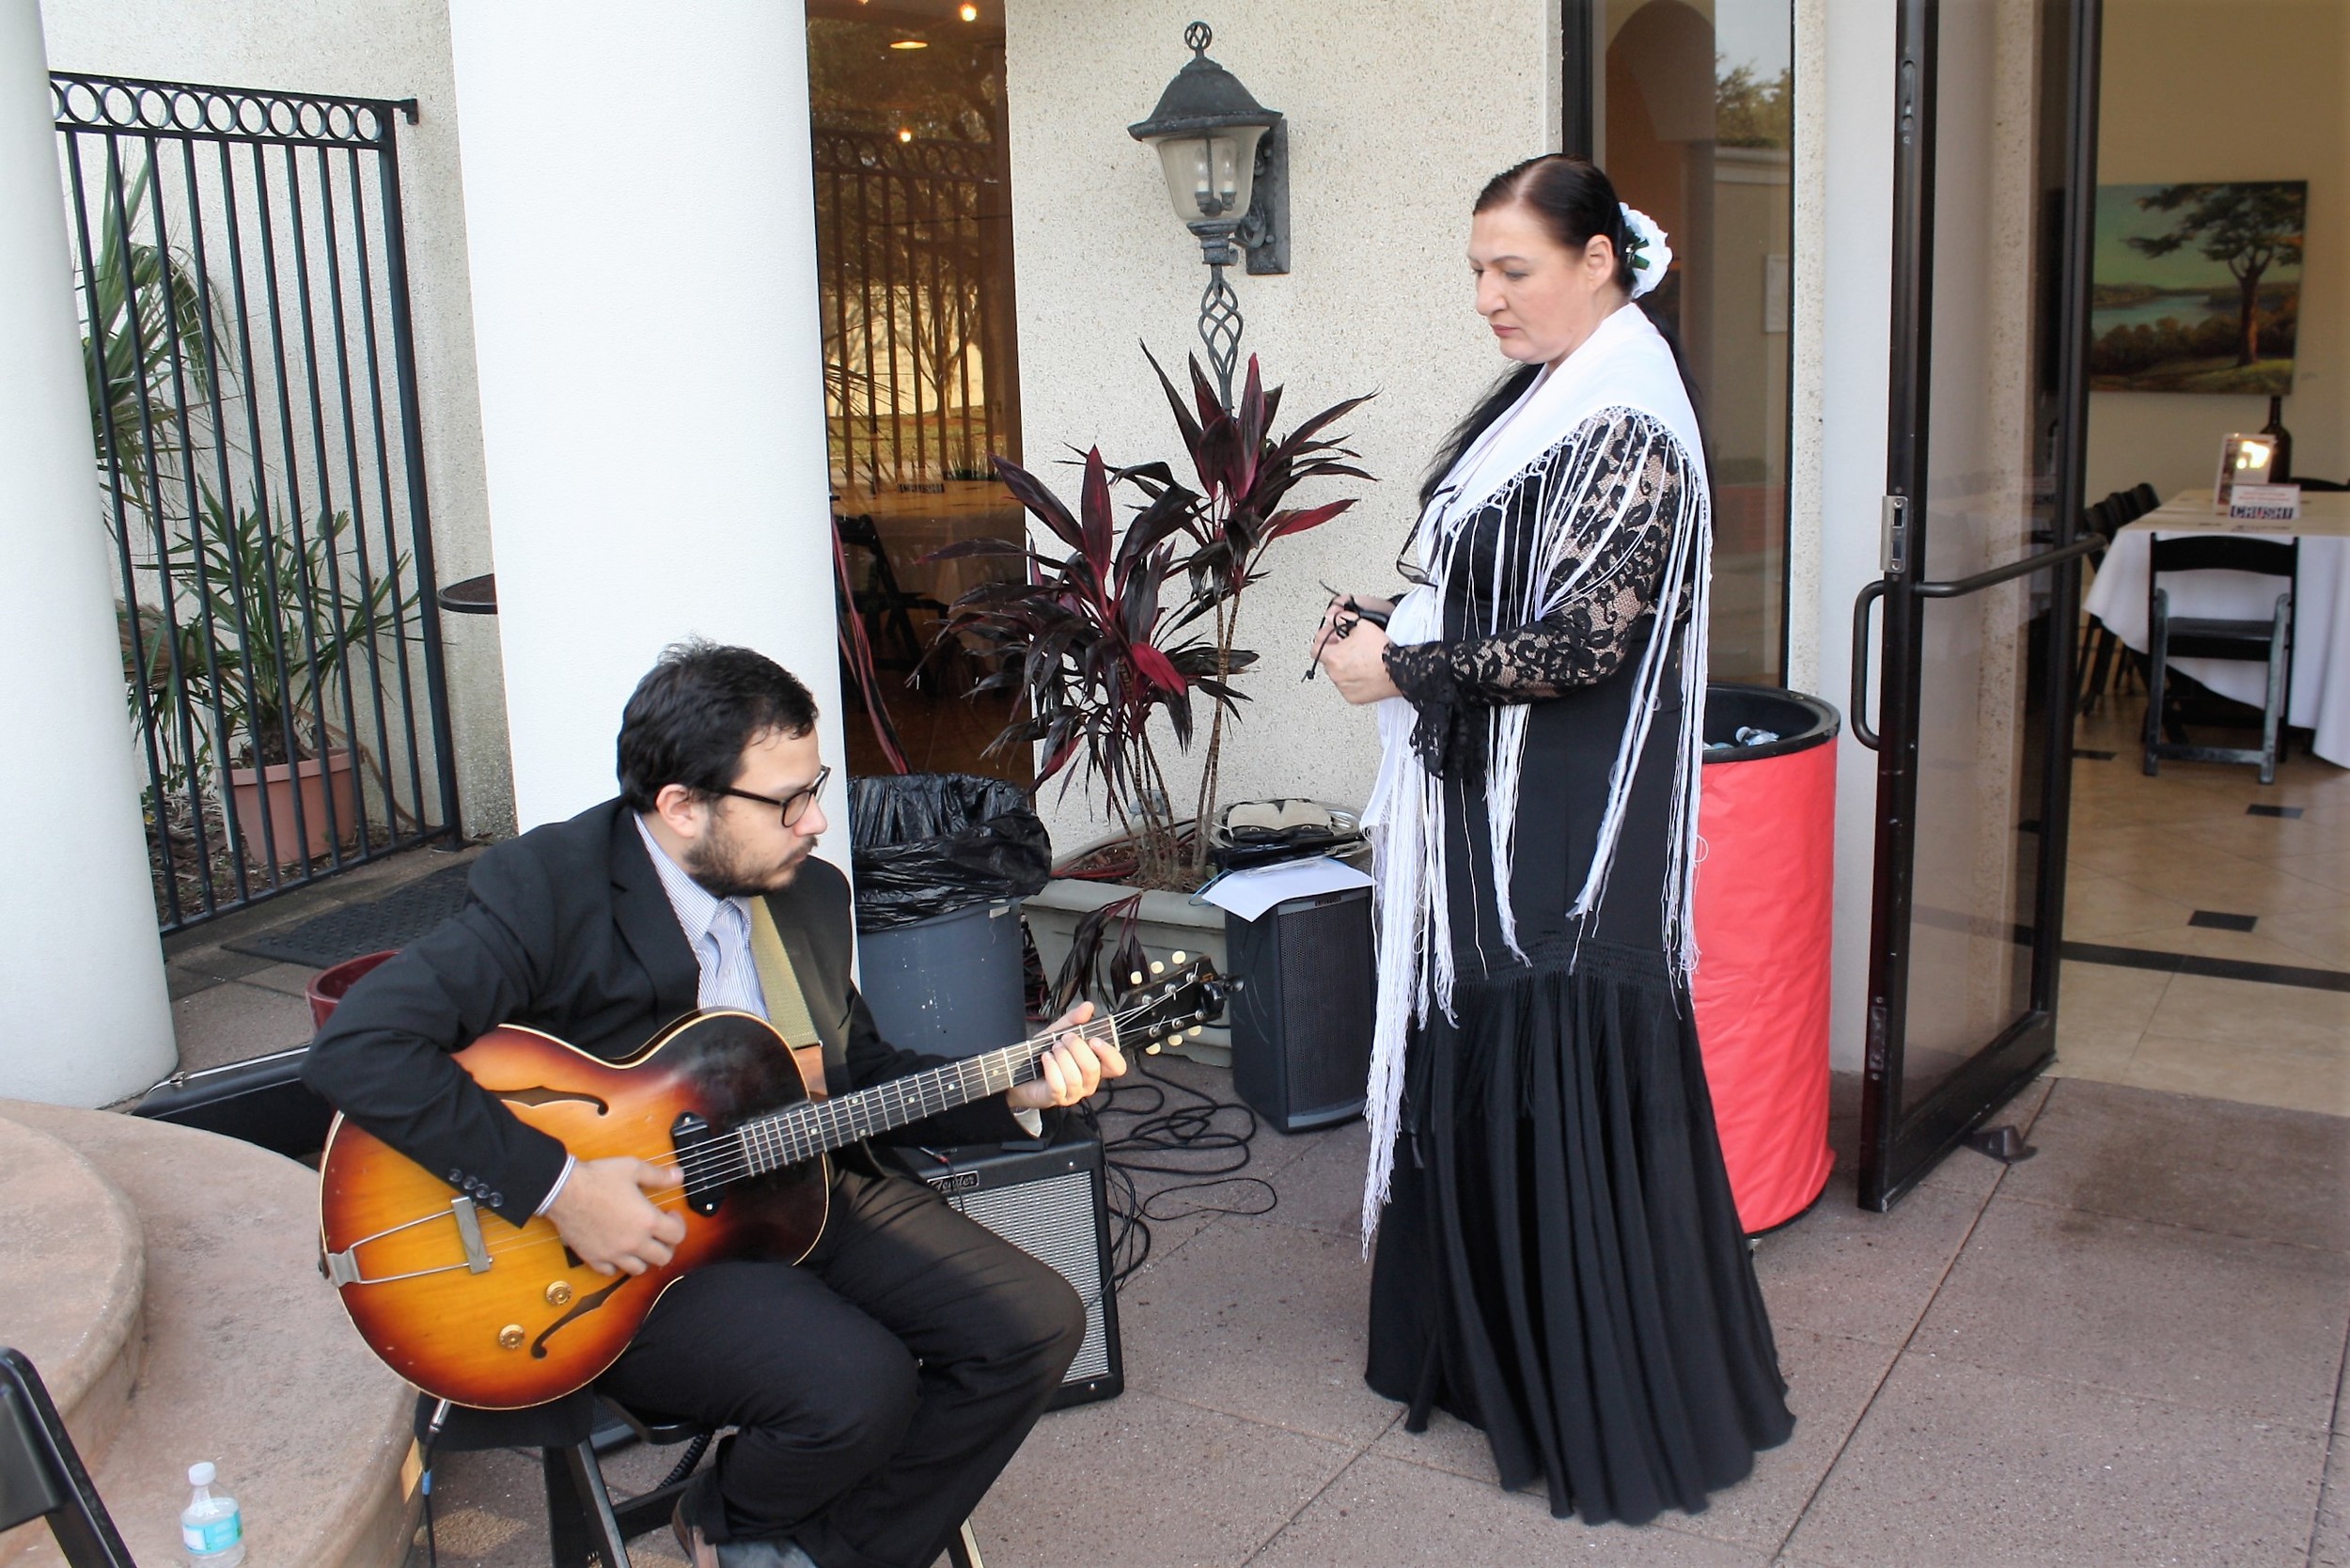 Andre Gruber and Carolina Rodriguez provided entertainment with an international flair.